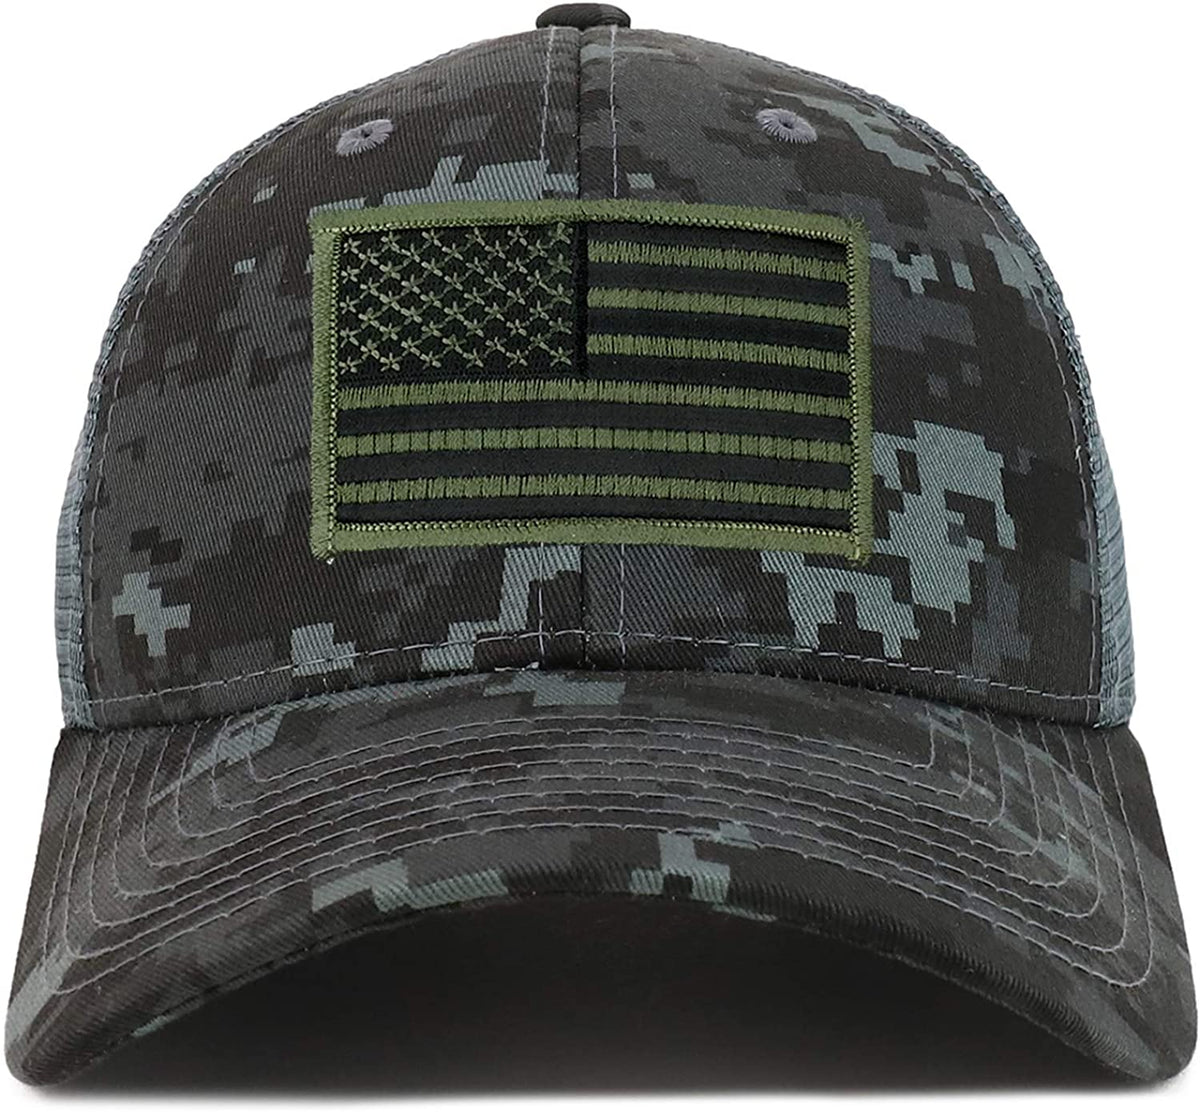 Armycrew Black Olive American Flag Patch Camouflage Structured Mesh Trucker Cap - NTG